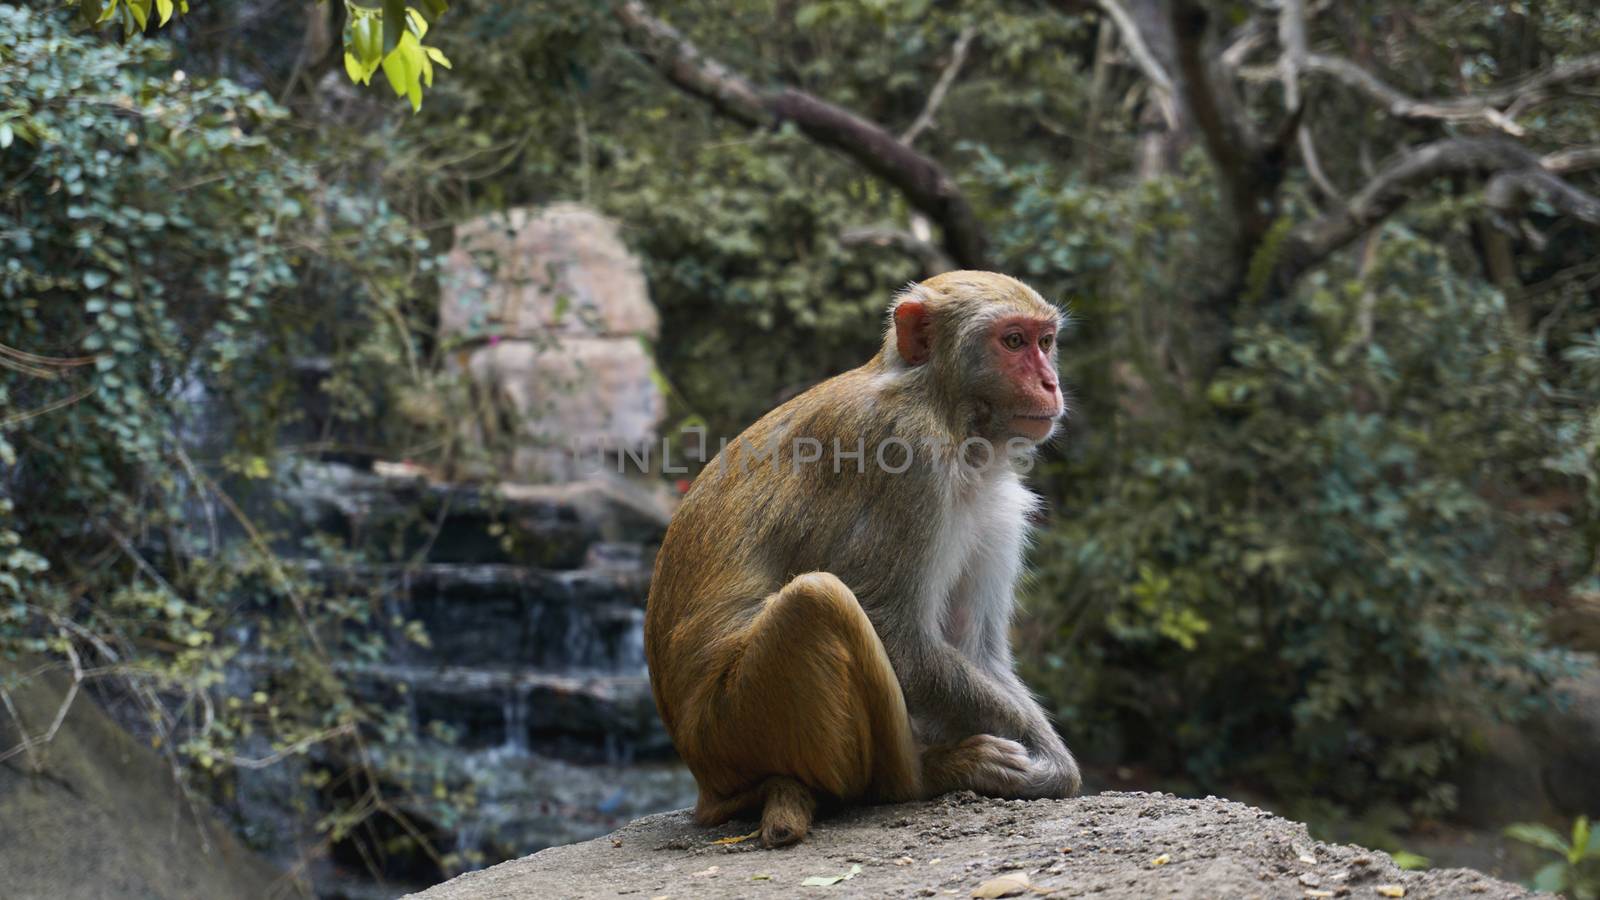 Monkey. Monkey macaque in the rain forest. Monkeys in the natural environment. China, Hainan